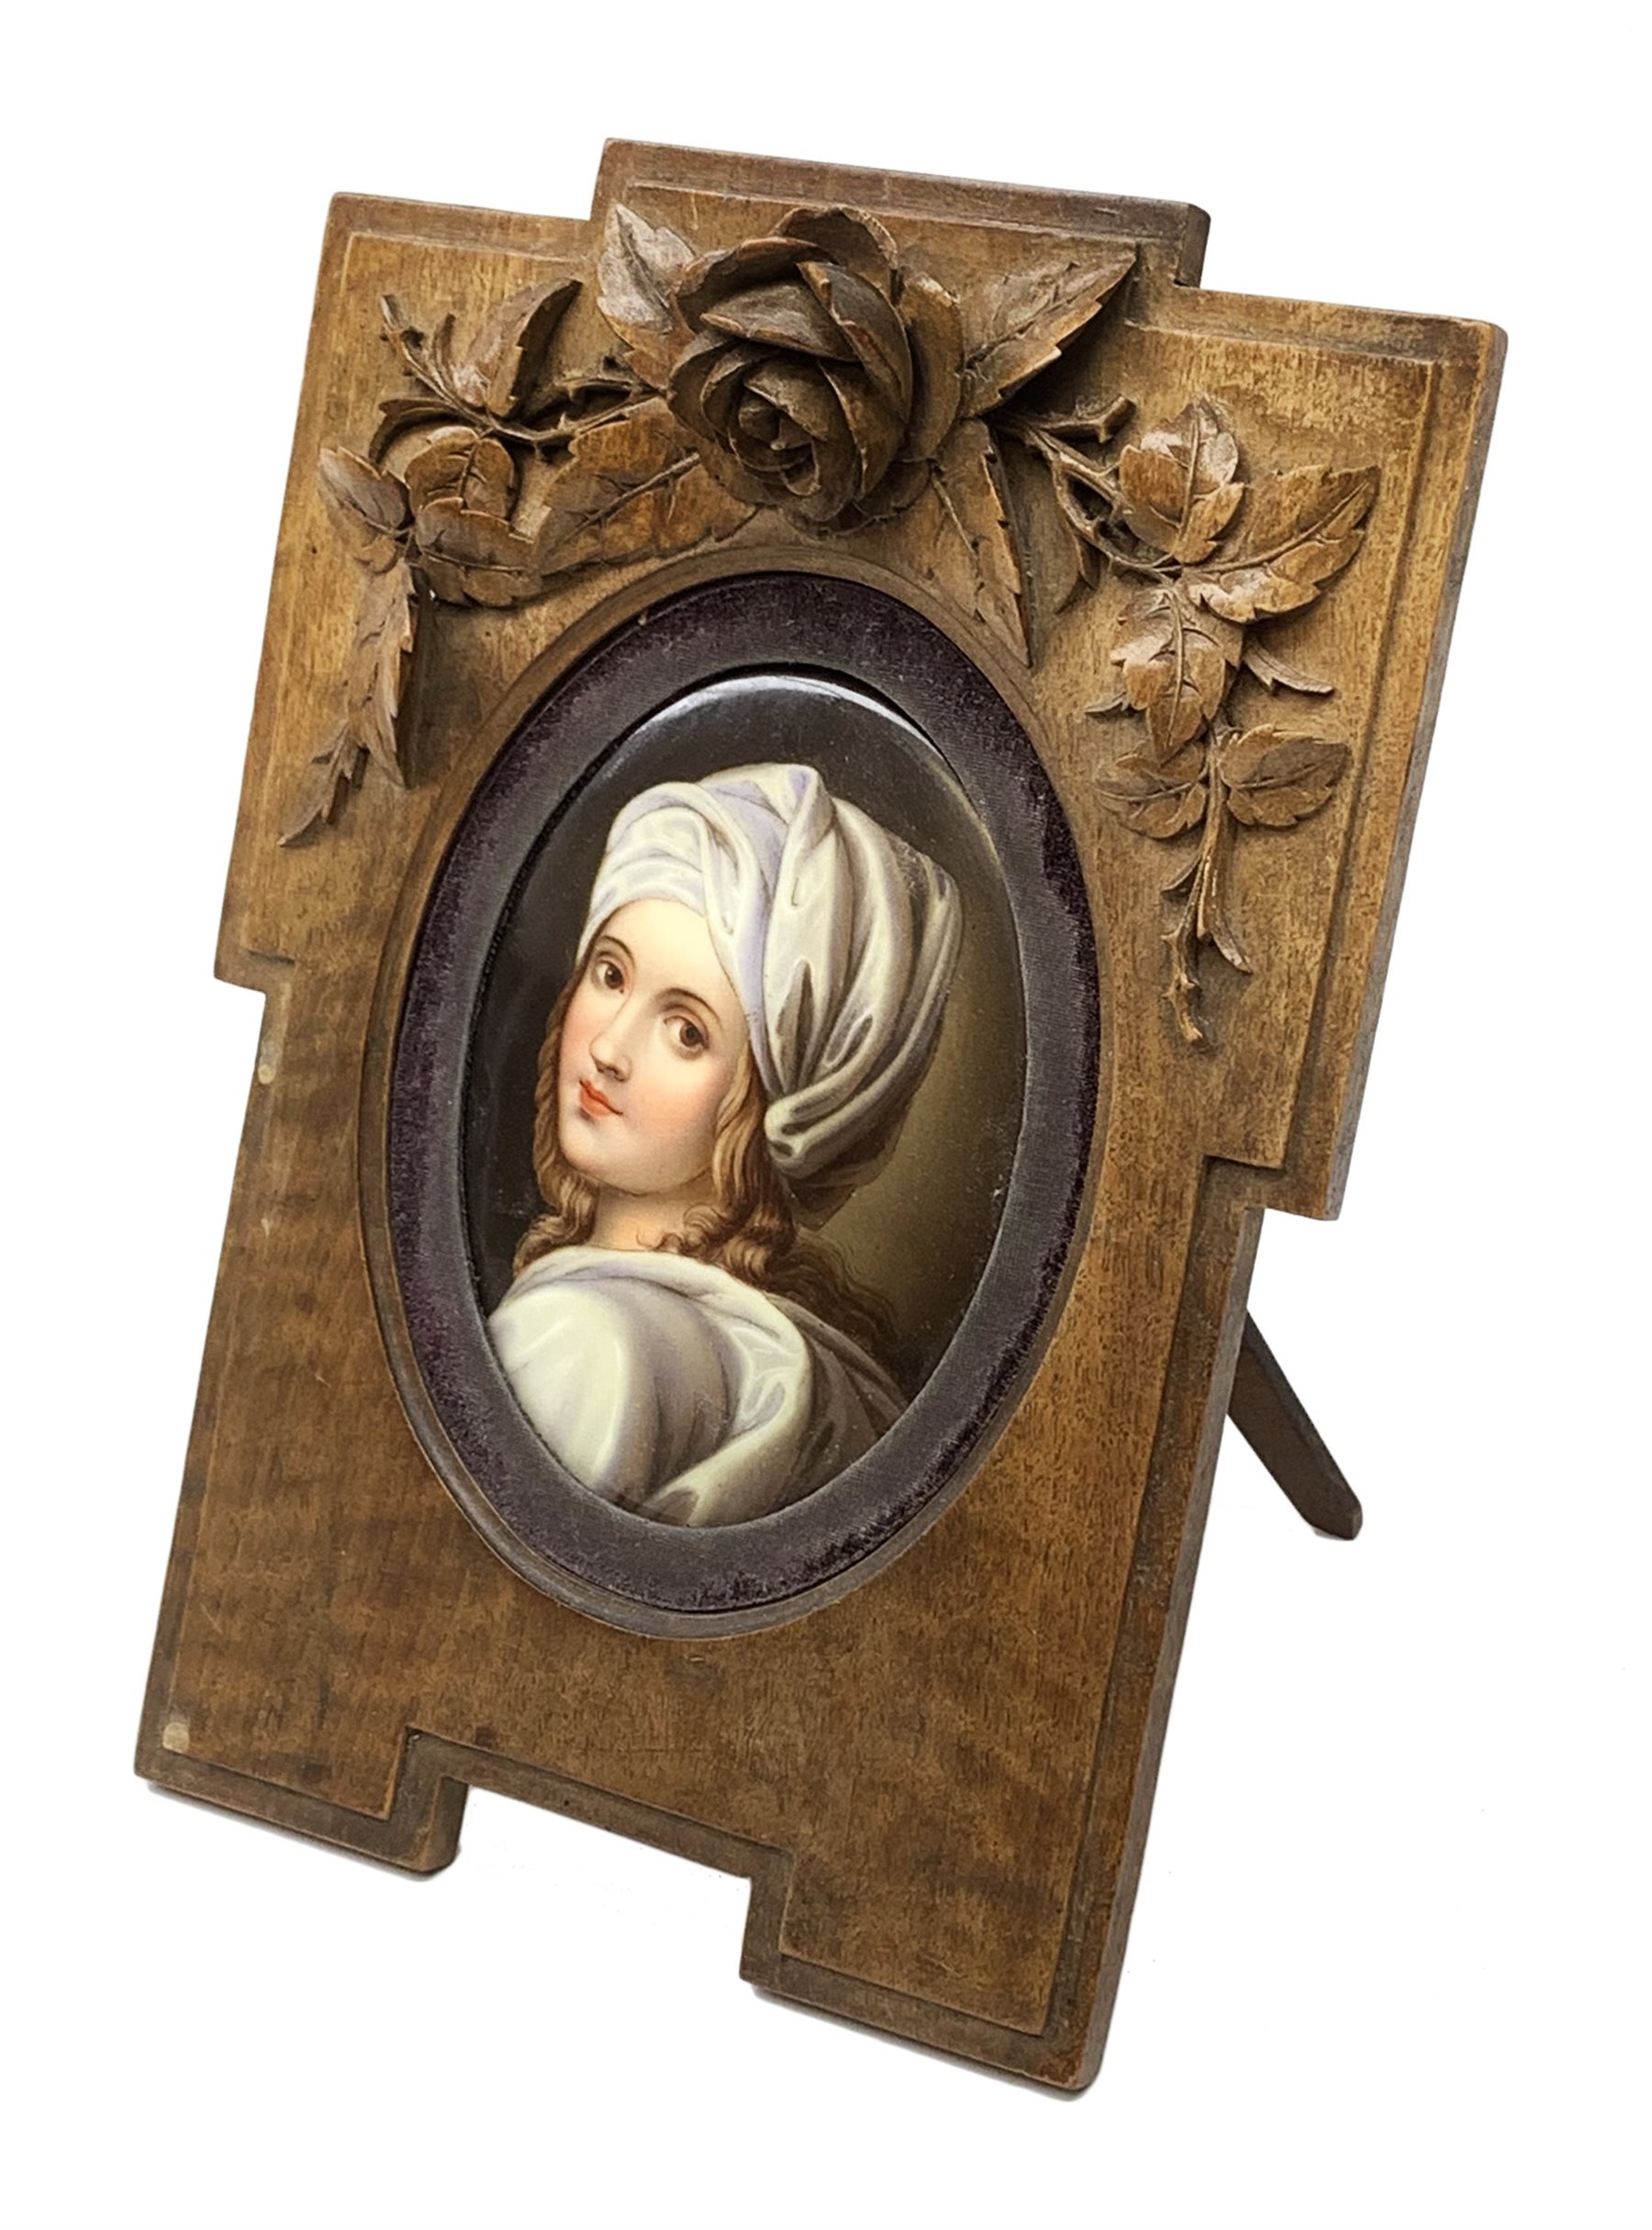 19th century KPM style oval porcelain plaque, painted with a portrait of Beatrice Cenci after Guido